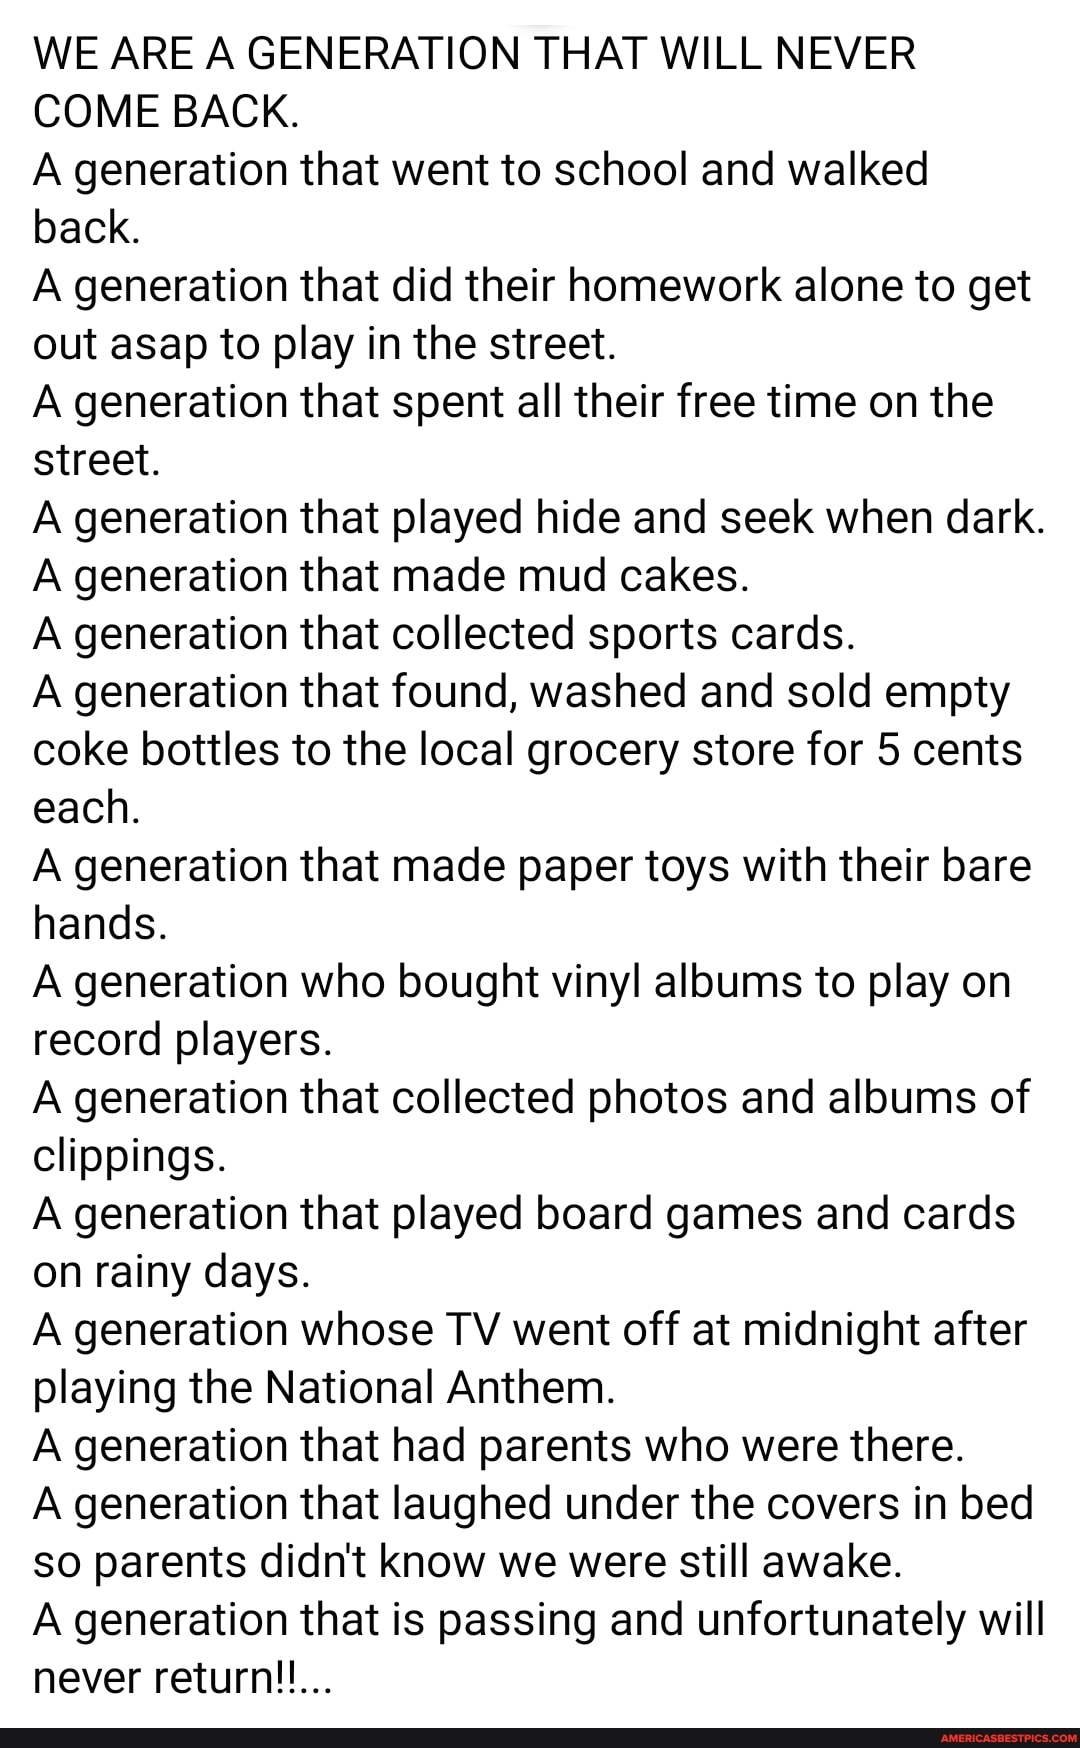 WE ARE A GENERATION THAT WILL NEVER COME BACK. A generation that went ...